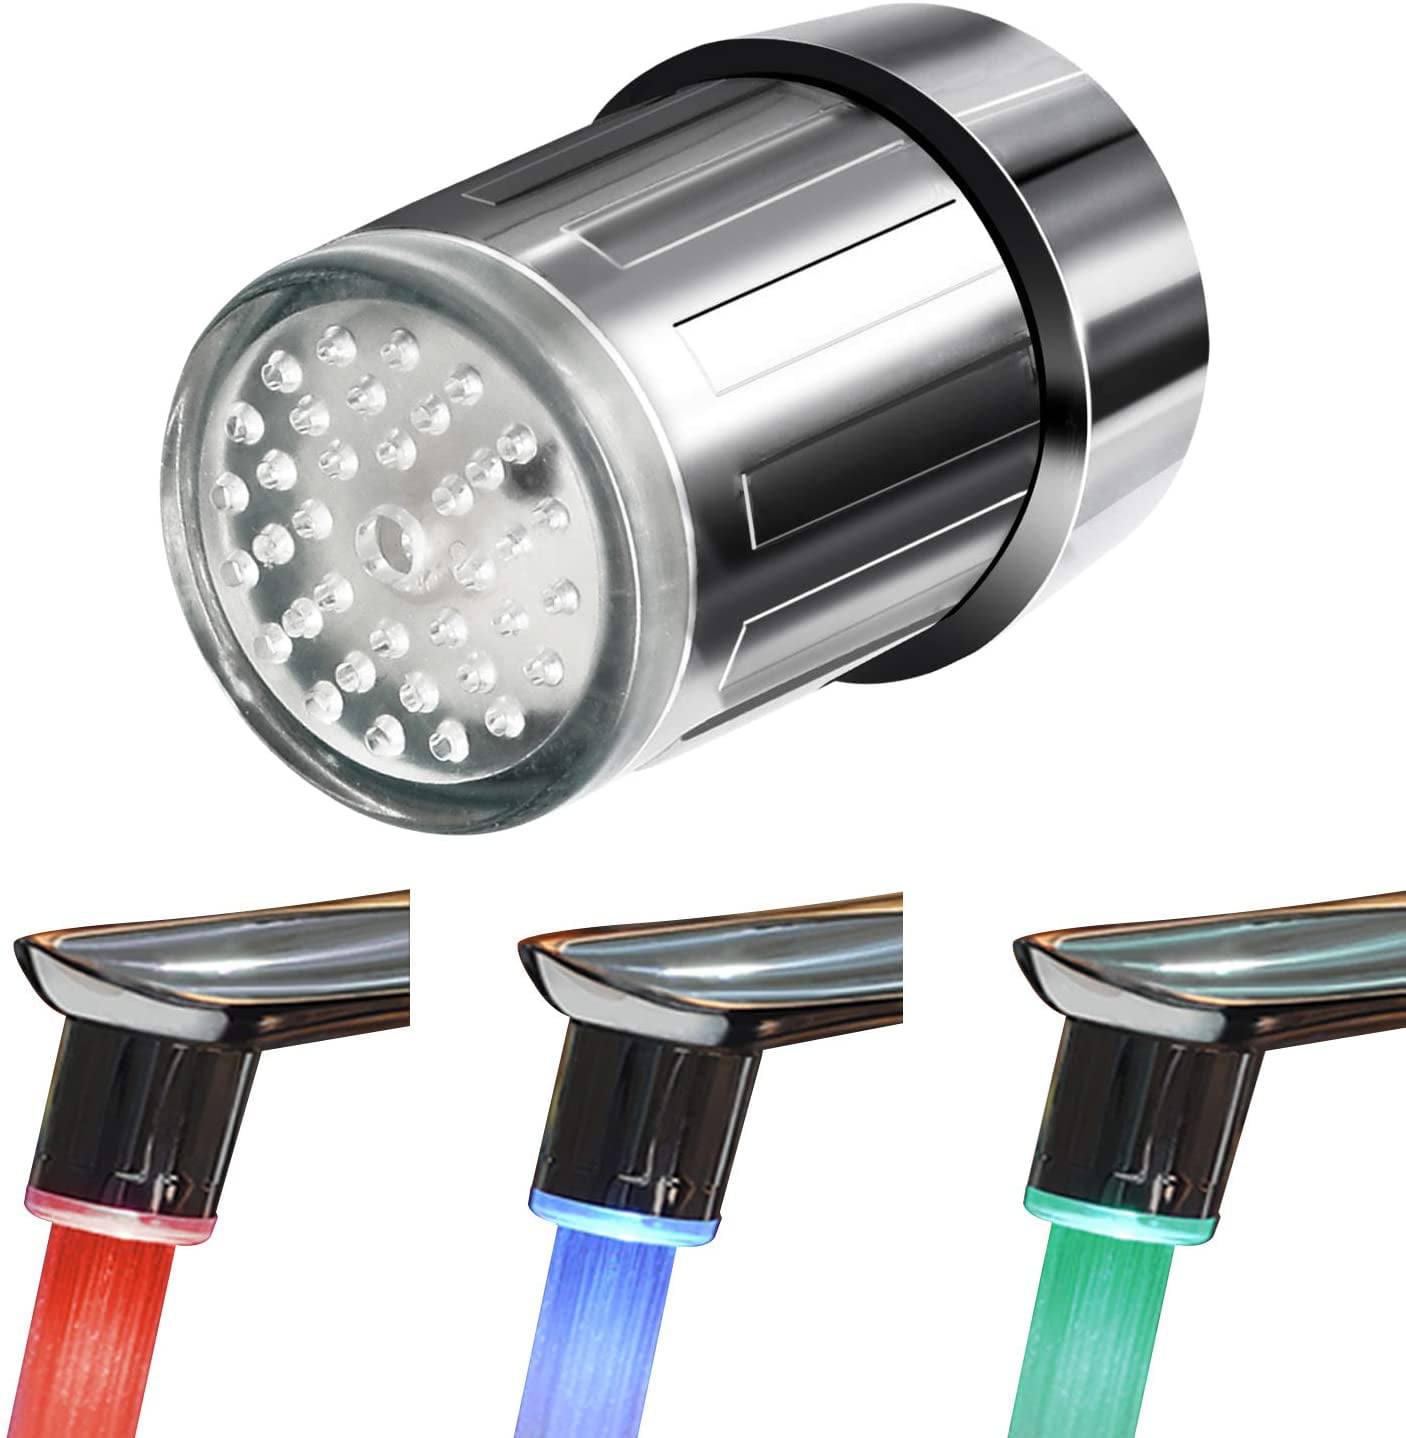 7 Color Changing Temperature Sensor LED Light Tap Glow Water Faucet Stream US 1X